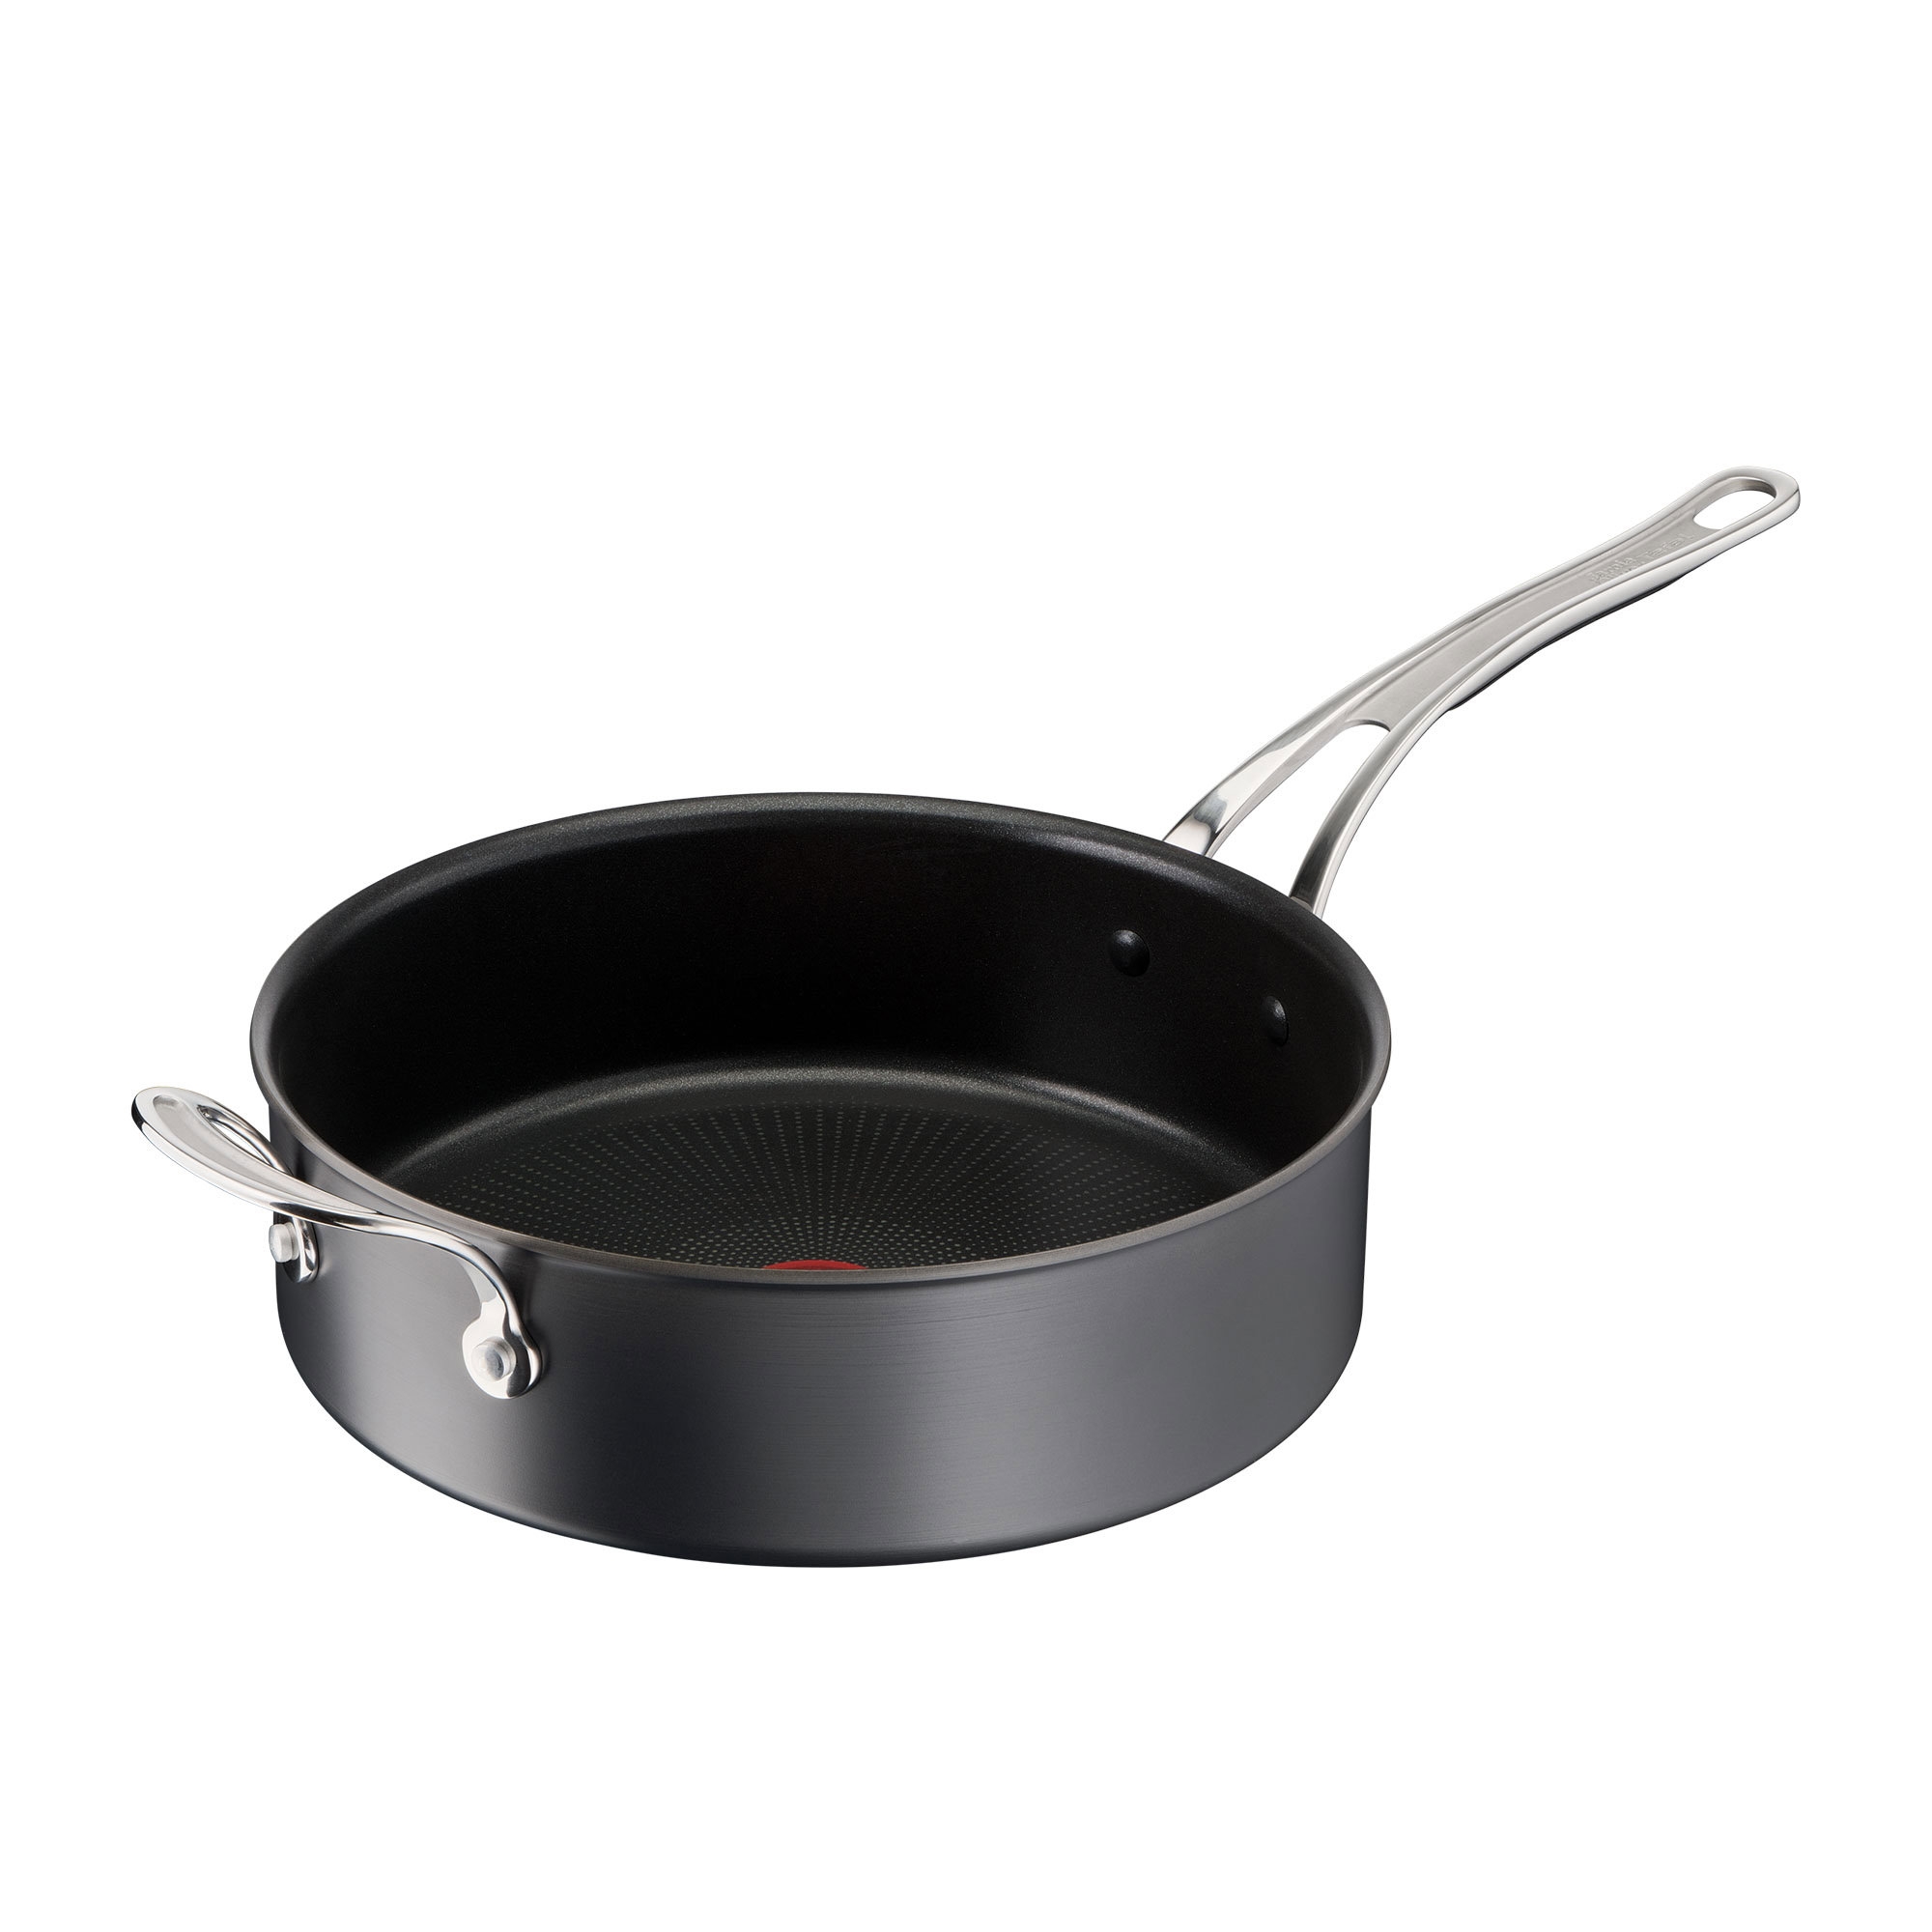 Jamie Oliver by Tefal Cook's Classic Hard Anodised Induction Saute Pan 26cm Image 2